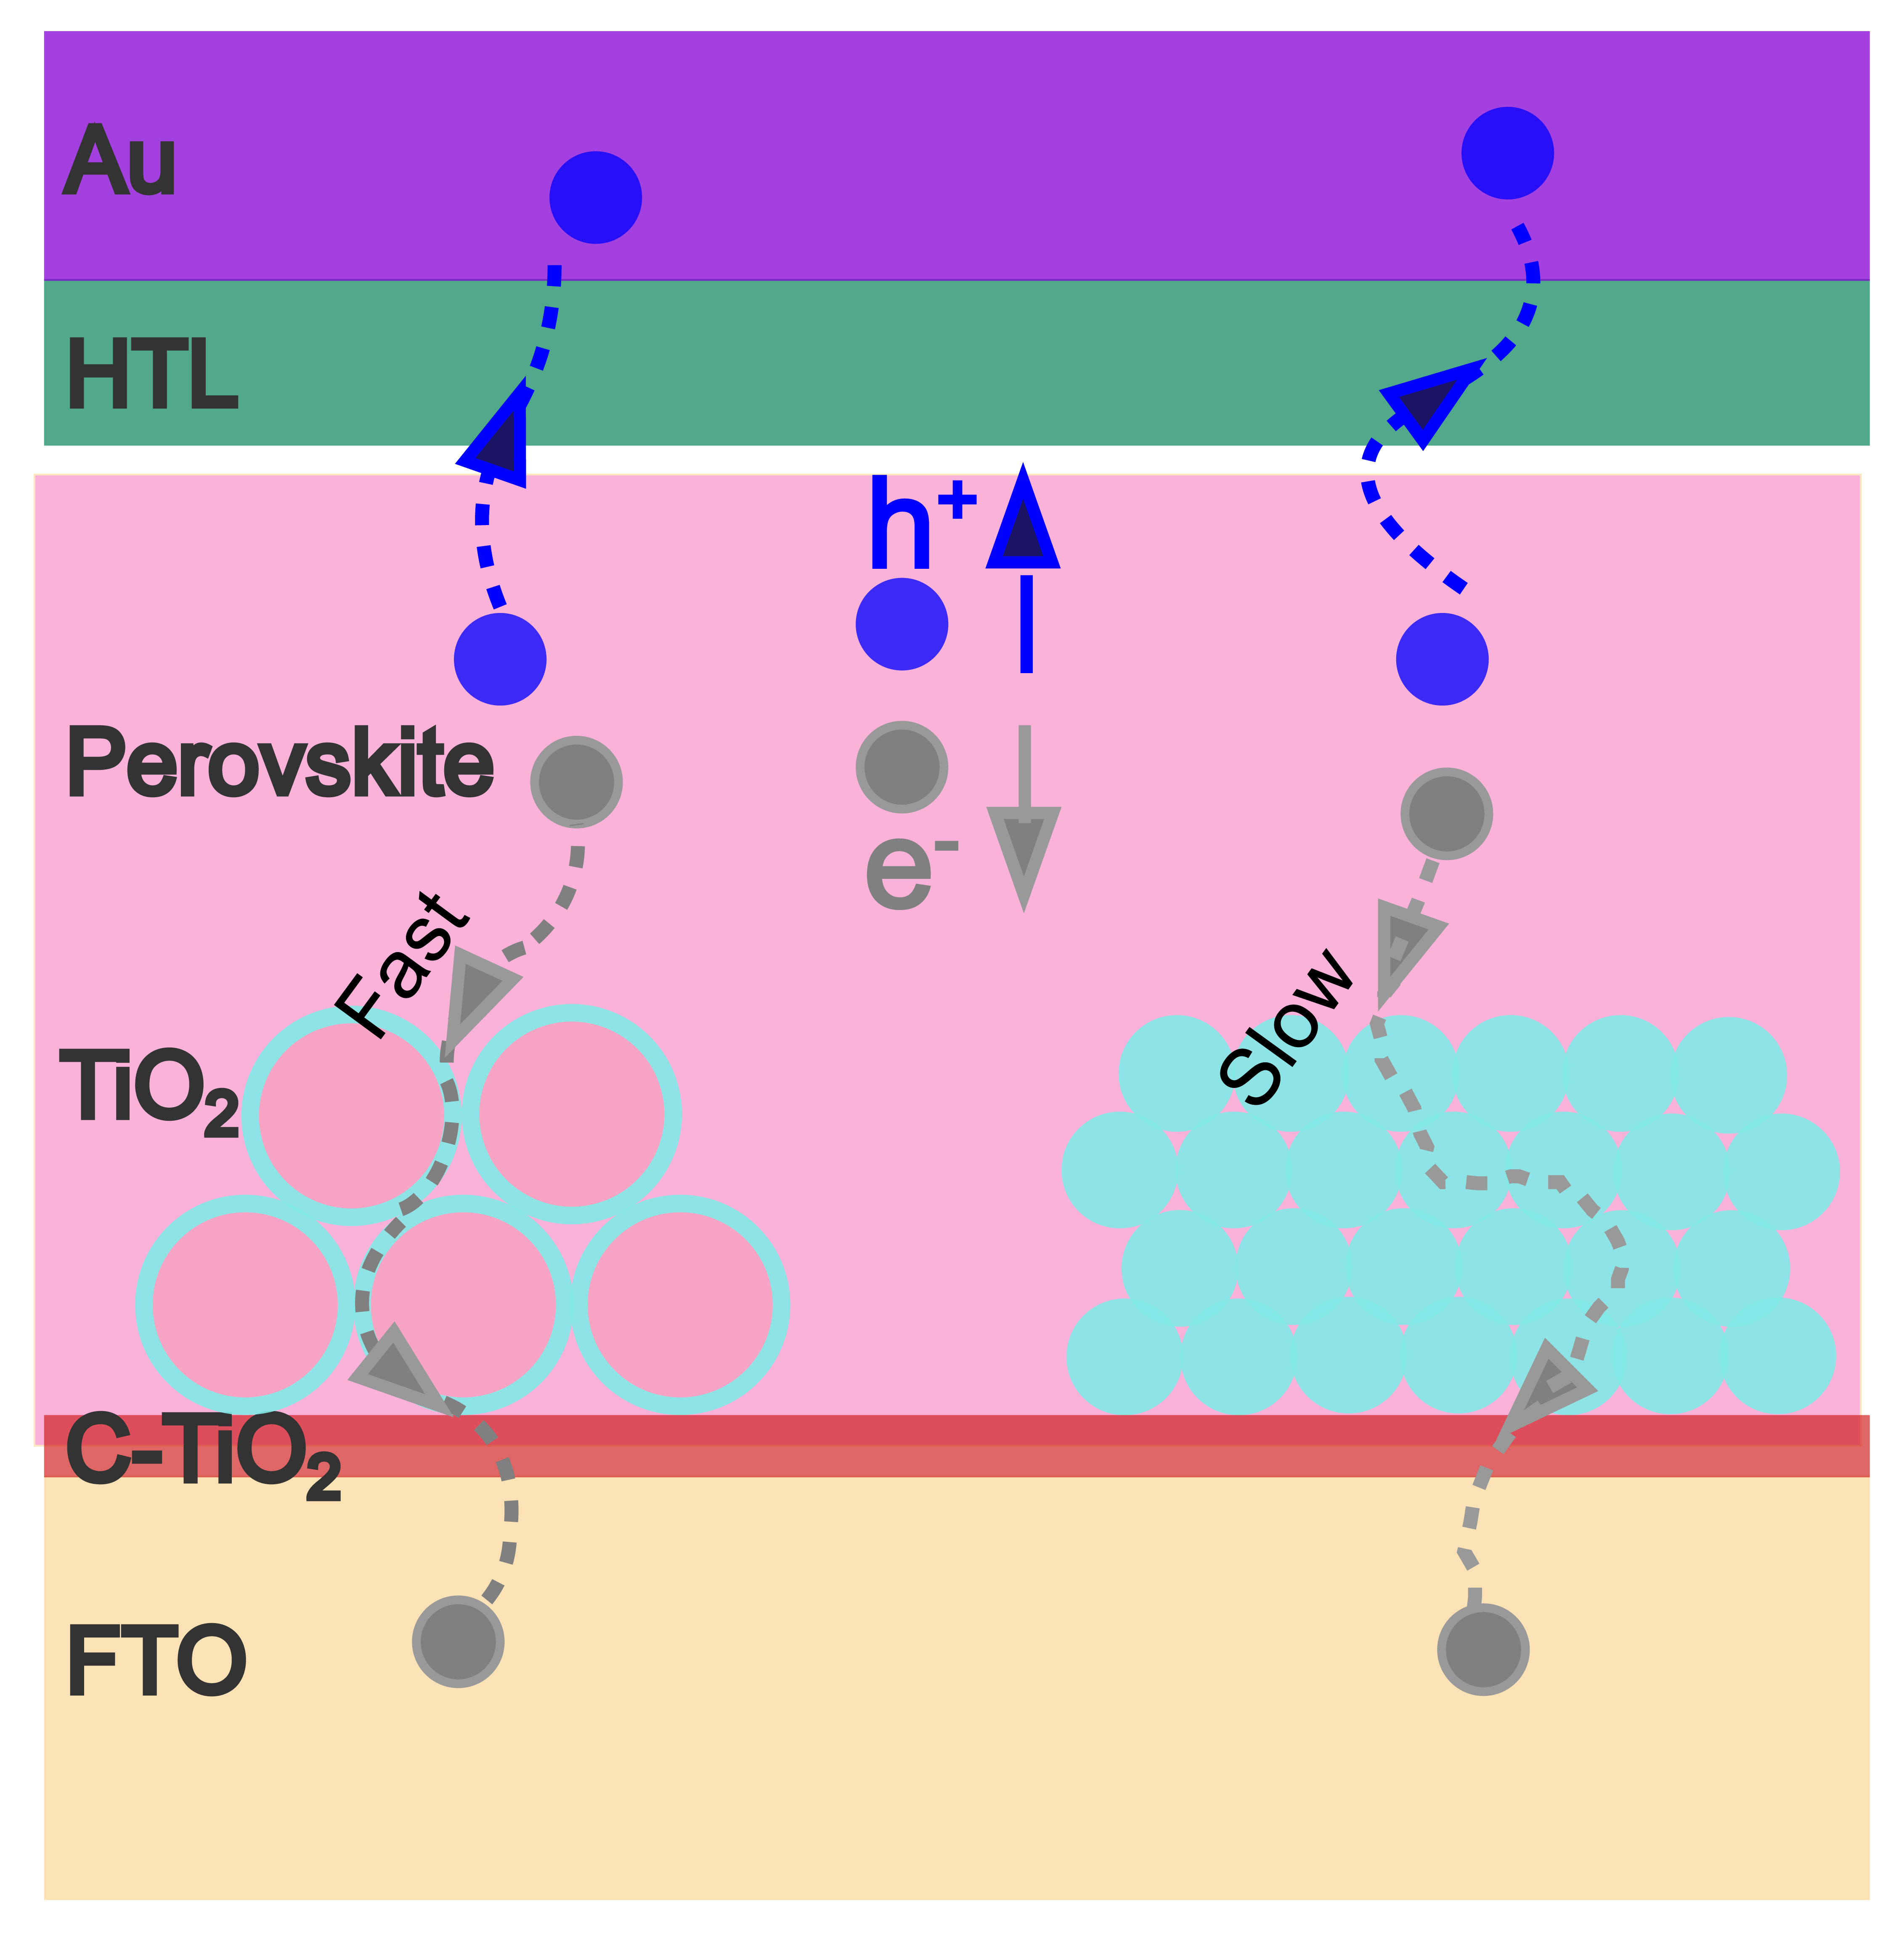 199.Eliminating Hysteresis of Perovskite Solar Cells with Hollow TiO2 Mesoporous Electron Transport Layer